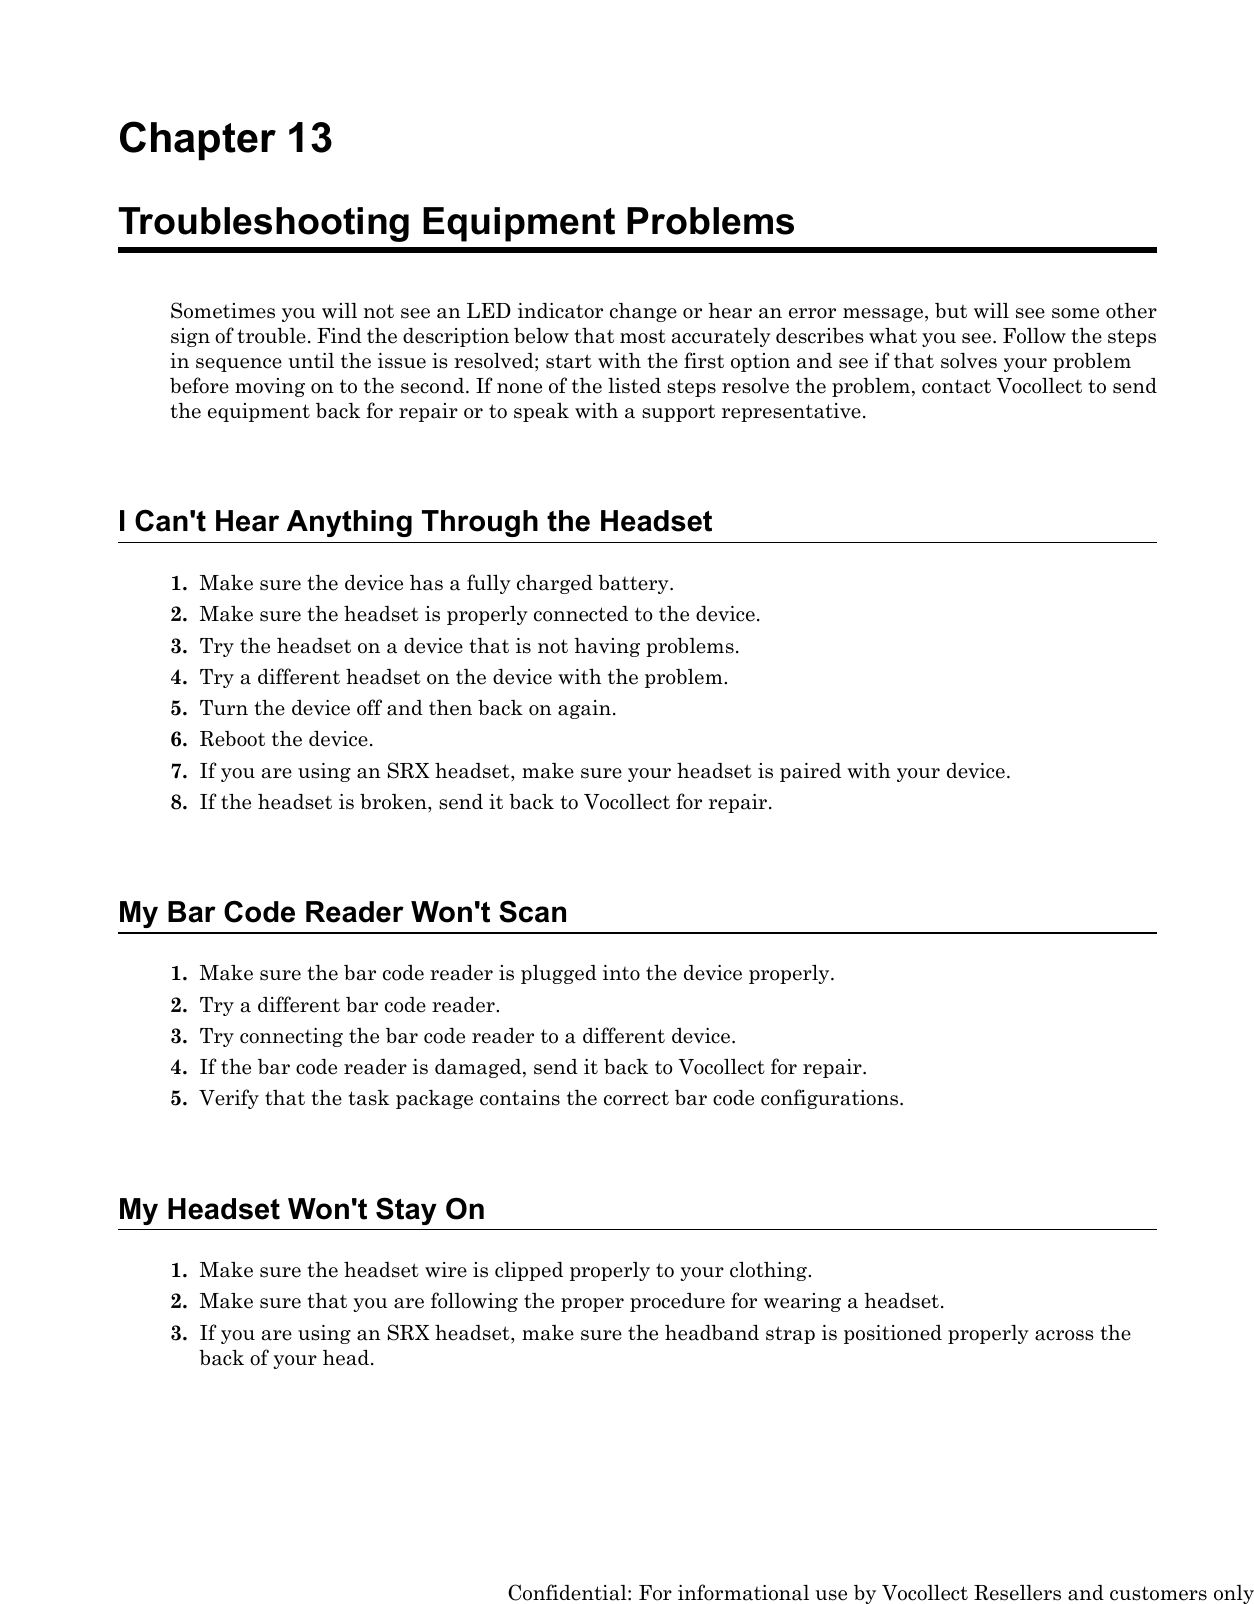 Chapter 13Troubleshooting Equipment ProblemsSometimes you will not see an LED indicator change or hear an error message, but will see some othersign of trouble. Find the description below that most accurately describes what you see. Follow the stepsin sequence until the issue is resolved; start with the first option and see if that solves your problembefore moving on to the second. If none of the listed steps resolve the problem, contact Vocollect to sendthe equipment back for repair or to speak with a support representative.I Can&apos;t Hear Anything Through the Headset1. Make sure the device has a fully charged battery.2. Make sure the headset is properly connected to the device.3. Try the headset on a device that is not having problems.4. Try a different headset on the device with the problem.5. Turn the device off and then back on again.6. Reboot the device.7. If you are using an SRX headset, make sure your headset is paired with your device.8. If the headset is broken, send it back to Vocollect for repair.My Bar Code Reader Won&apos;t Scan1. Make sure the bar code reader is plugged into the device properly.2. Try a different bar code reader.3. Try connecting the bar code reader to a different device.4. If the bar code reader is damaged, send it back to Vocollect for repair.5. Verify that the task package contains the correct bar code configurations.My Headset Won&apos;t Stay On1. Make sure the headset wire is clipped properly to your clothing.2. Make sure that you are following the proper procedure for wearing a headset.3. If you are using an SRX headset, make sure the headband strap is positioned properly across theback of your head.Confidential: For informational use by Vocollect Resellers and customers only